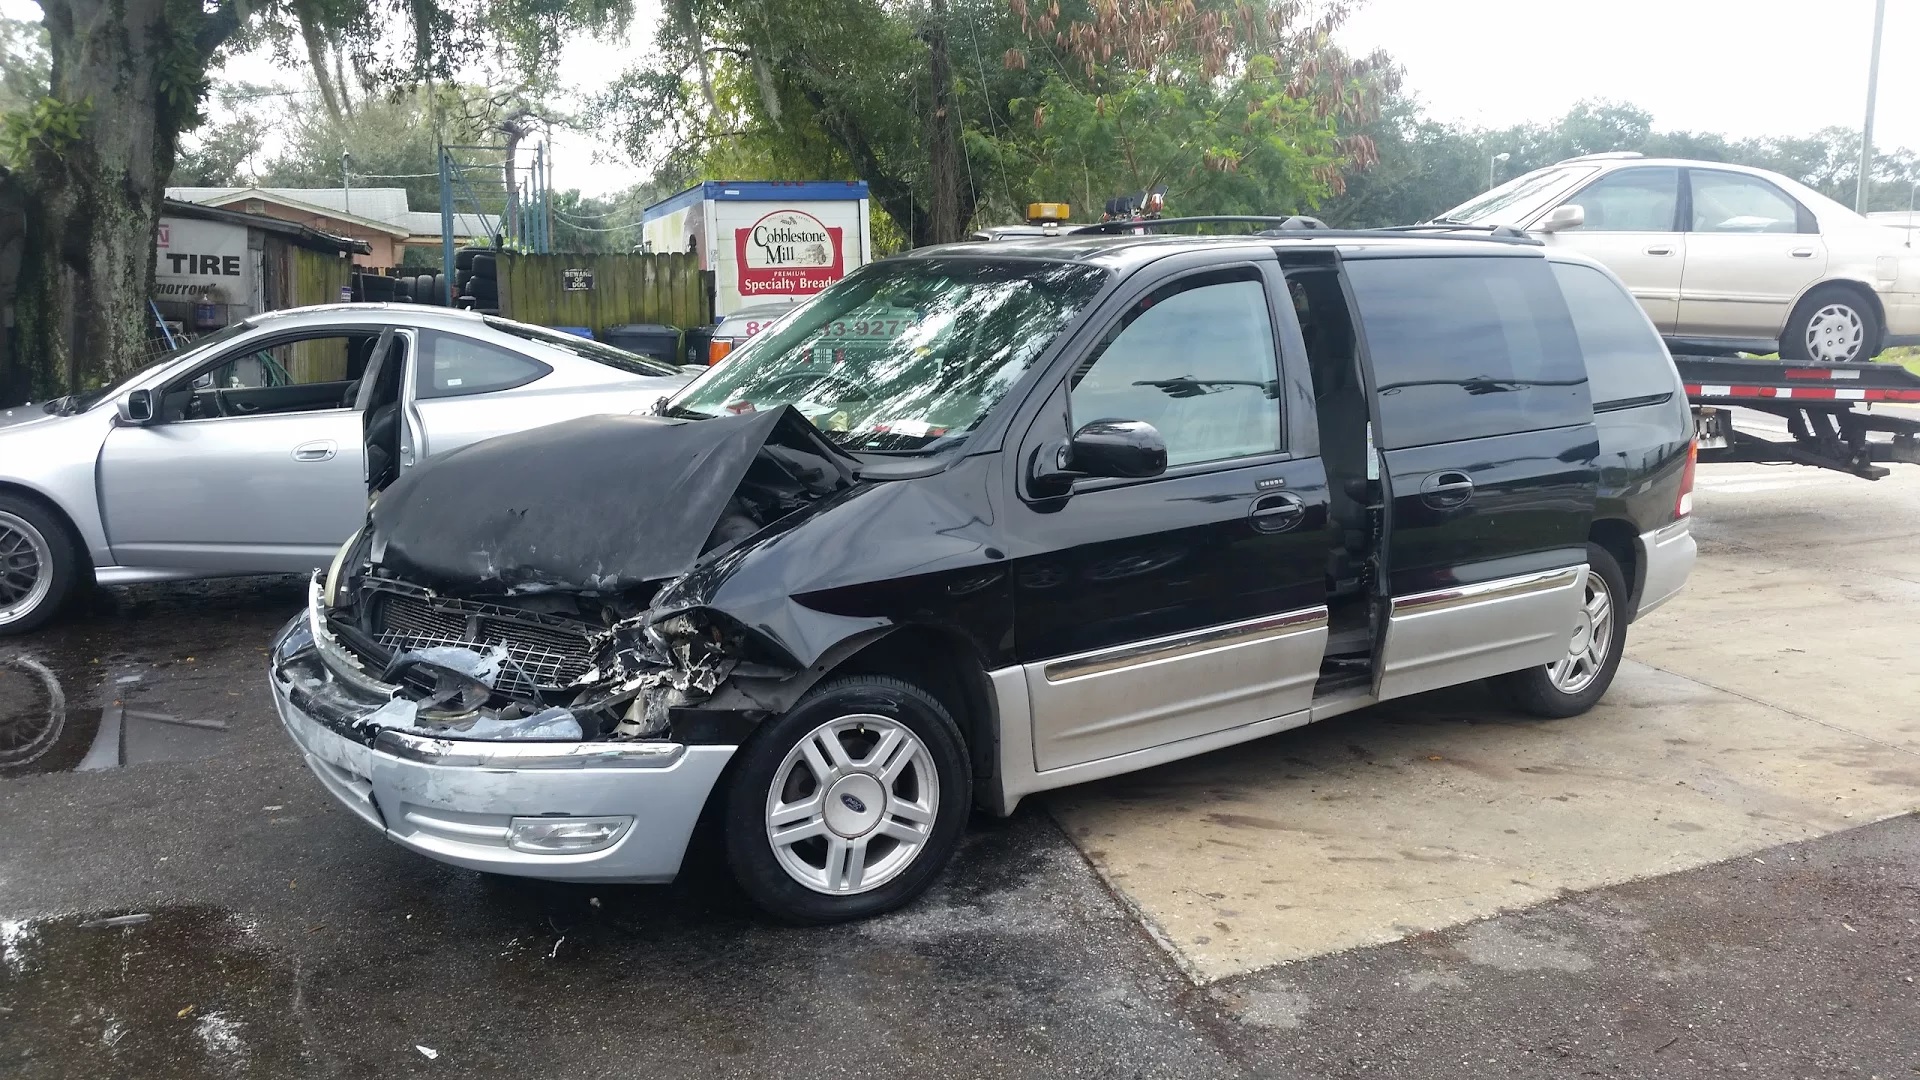 2002 Ford Windstar, too much weed Florida Junk Cars Tampa (813)833-9273